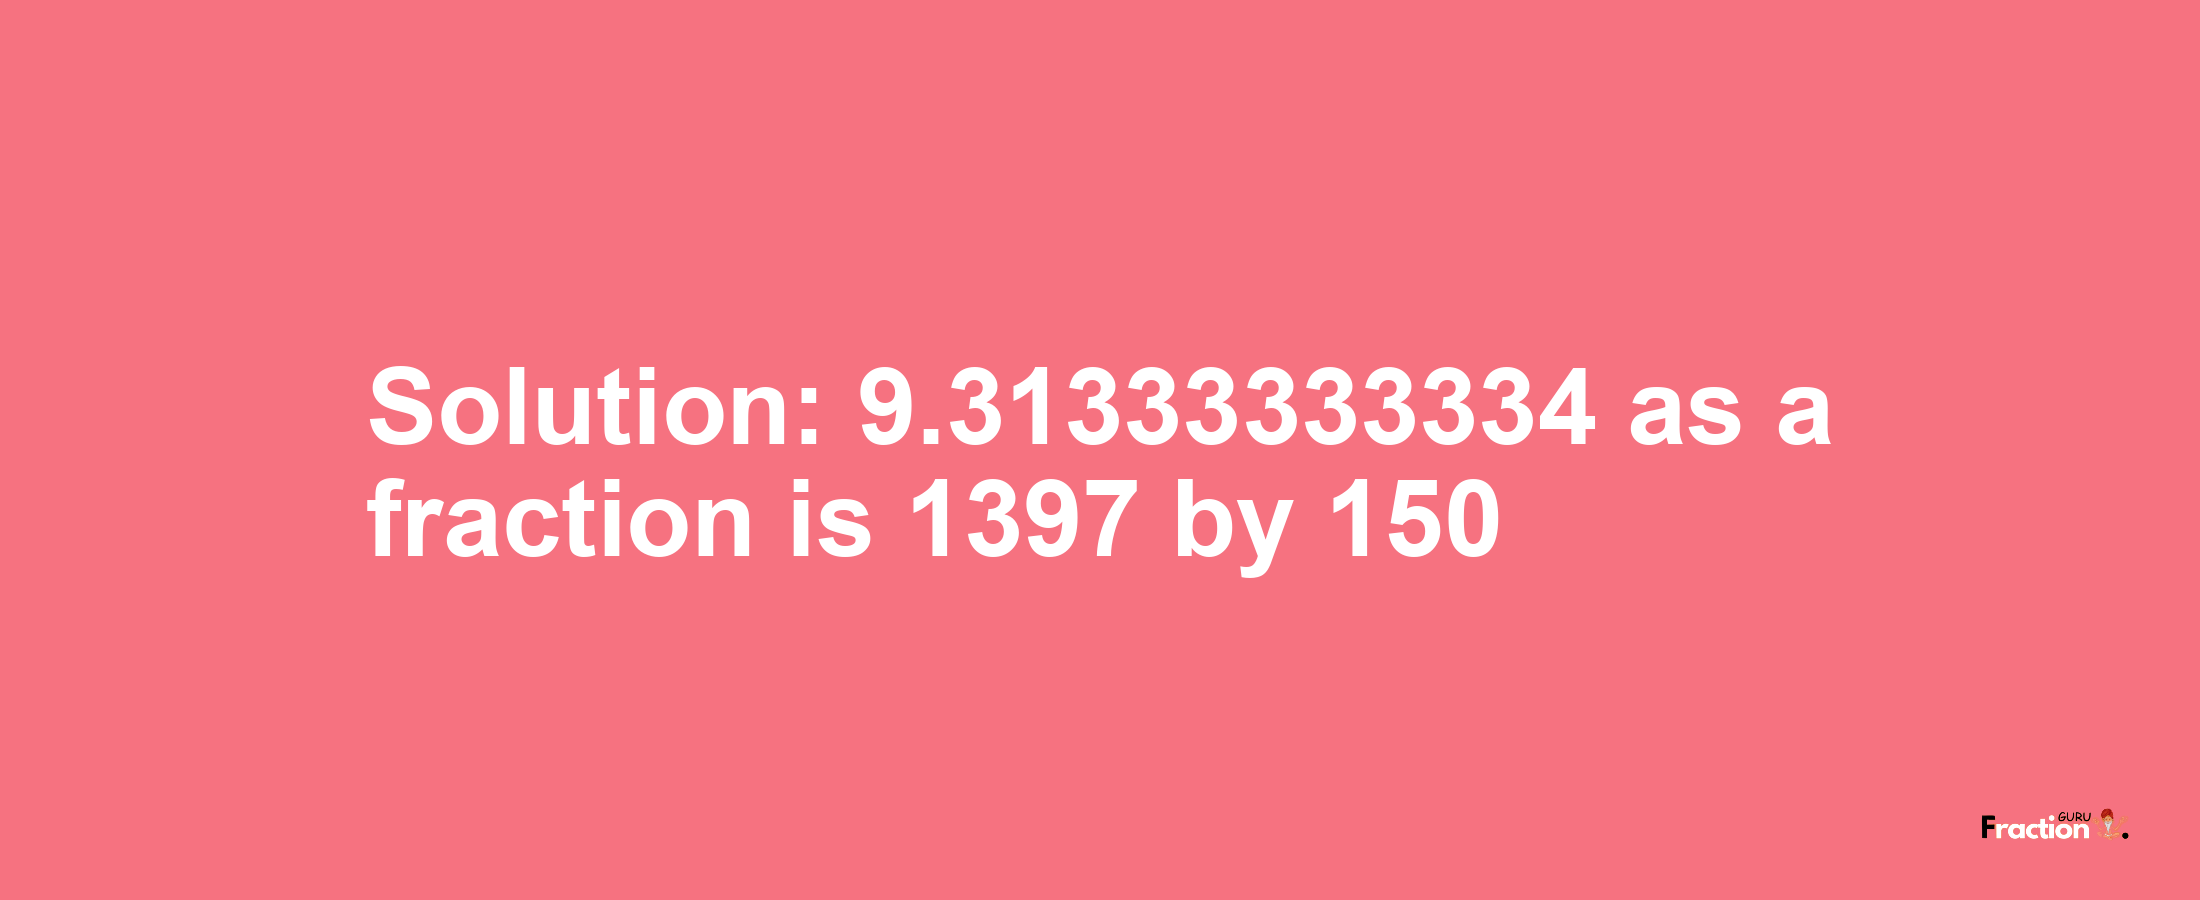 Solution:9.31333333334 as a fraction is 1397/150